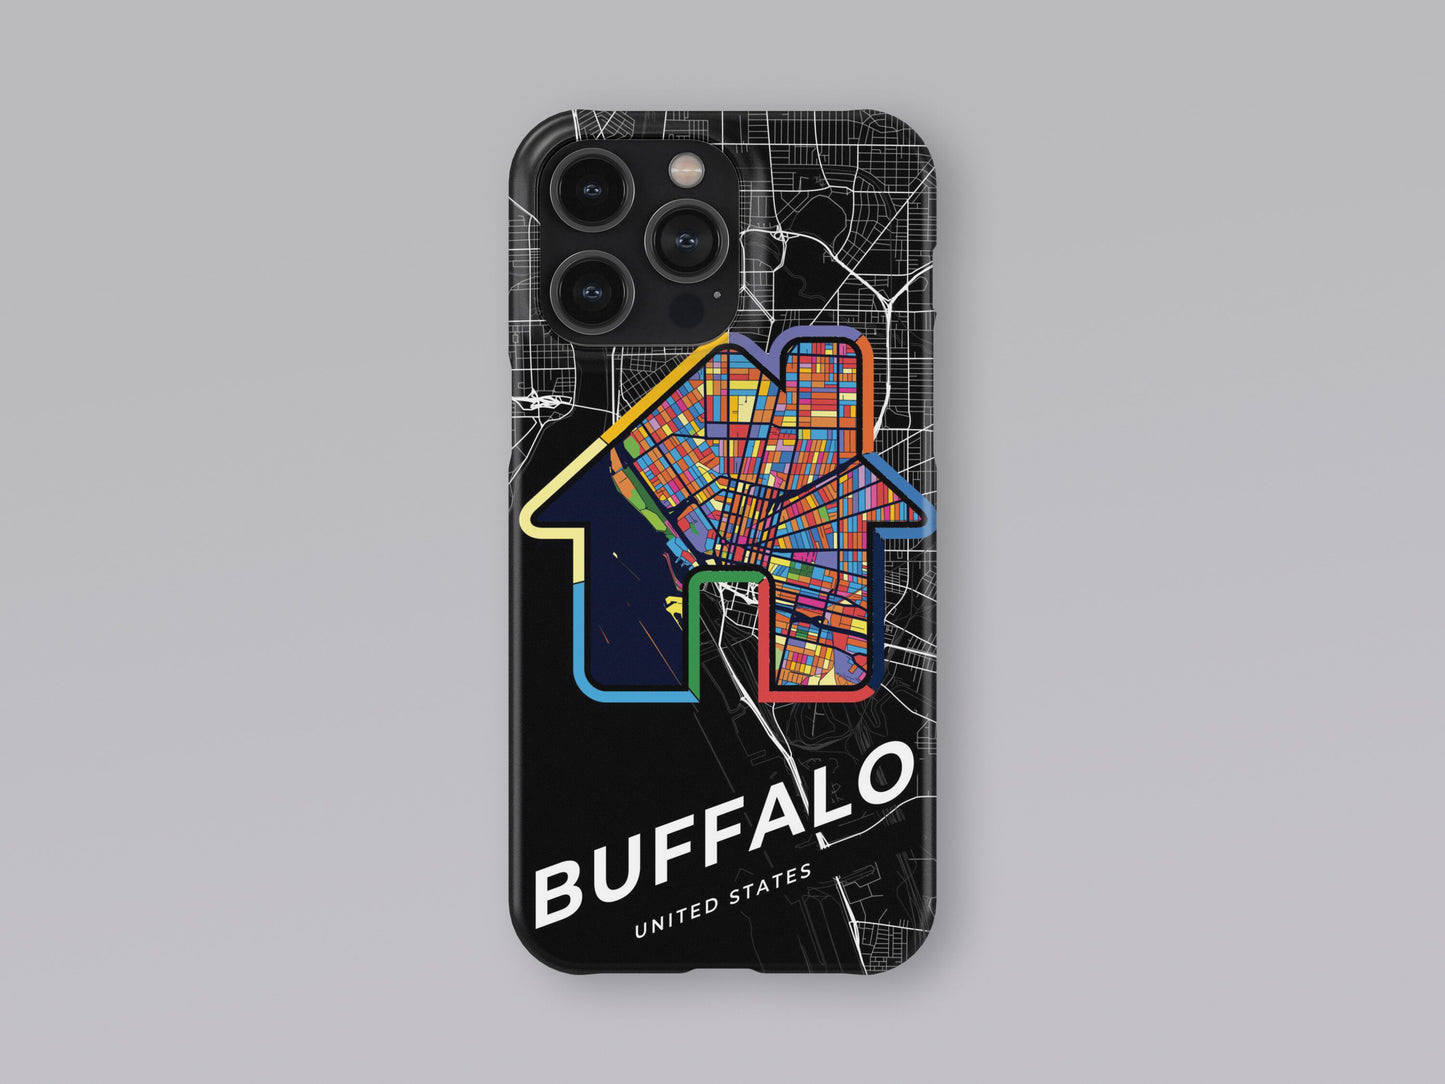 Buffalo New York slim phone case with colorful icon. Birthday, wedding or housewarming gift. Couple match cases. 3